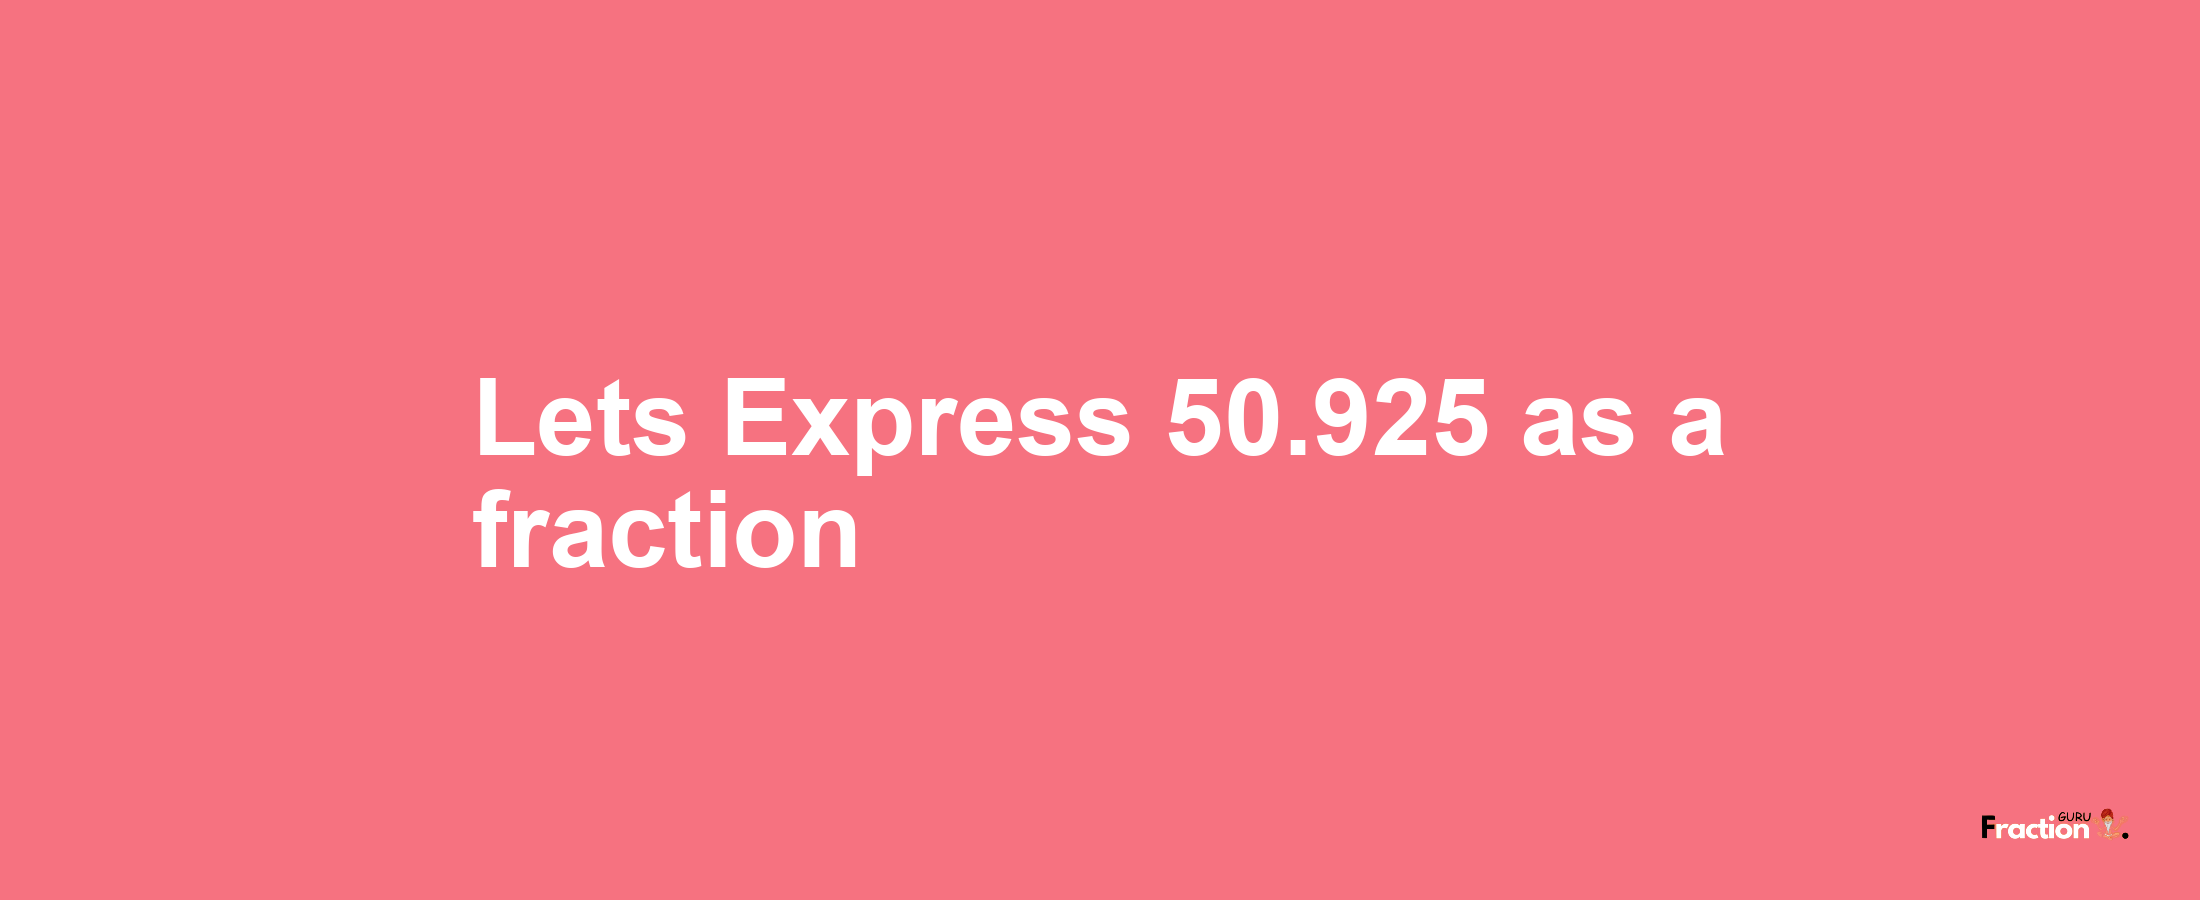 Lets Express 50.925 as afraction